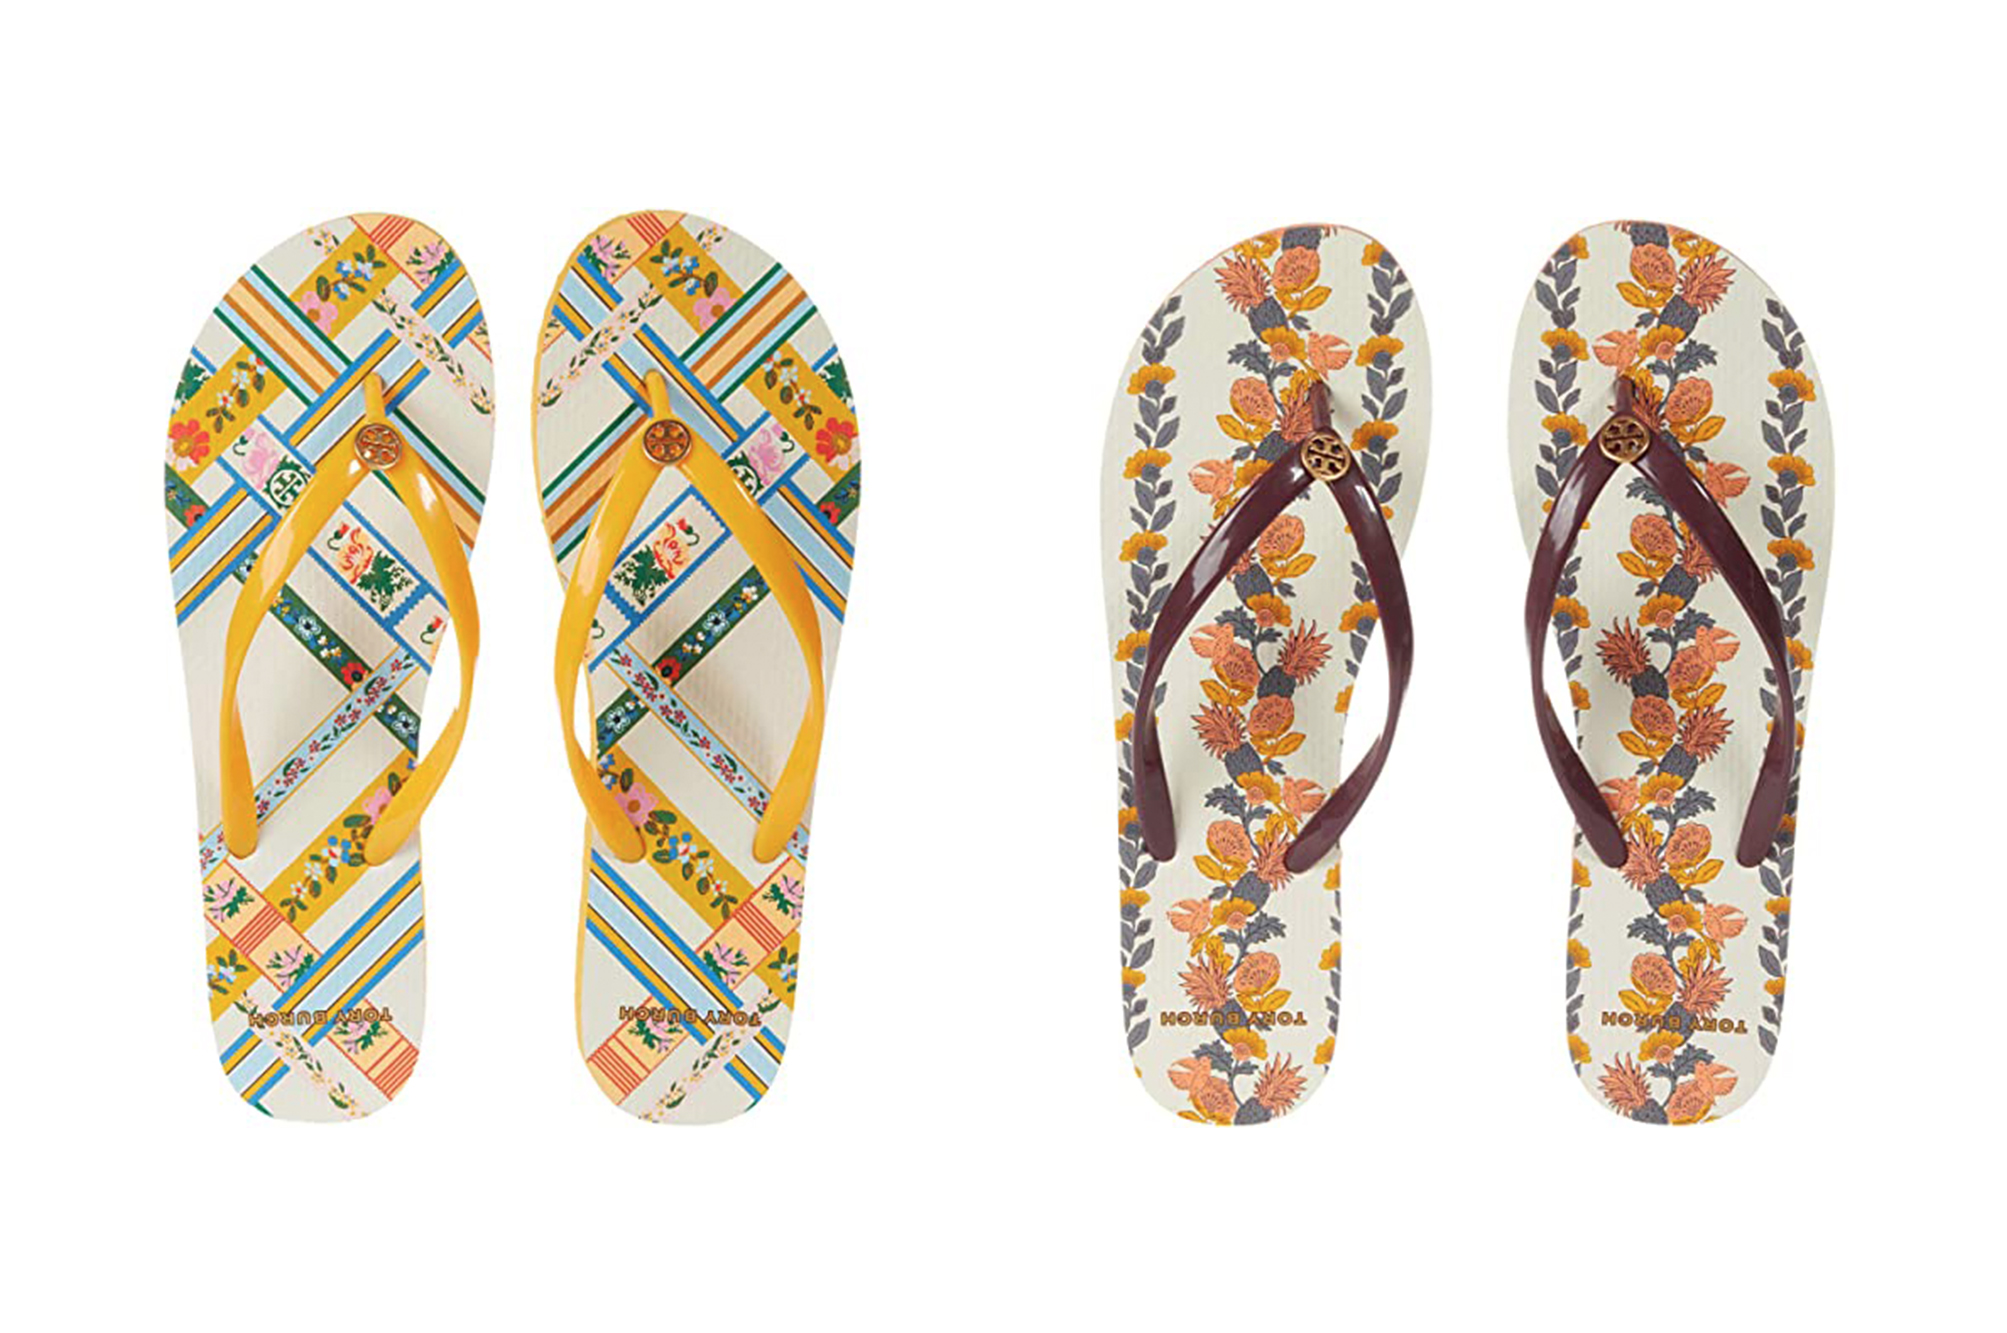 skill chin candidate These Tory Burch Retro Print Flip Flops Are So Comfortable